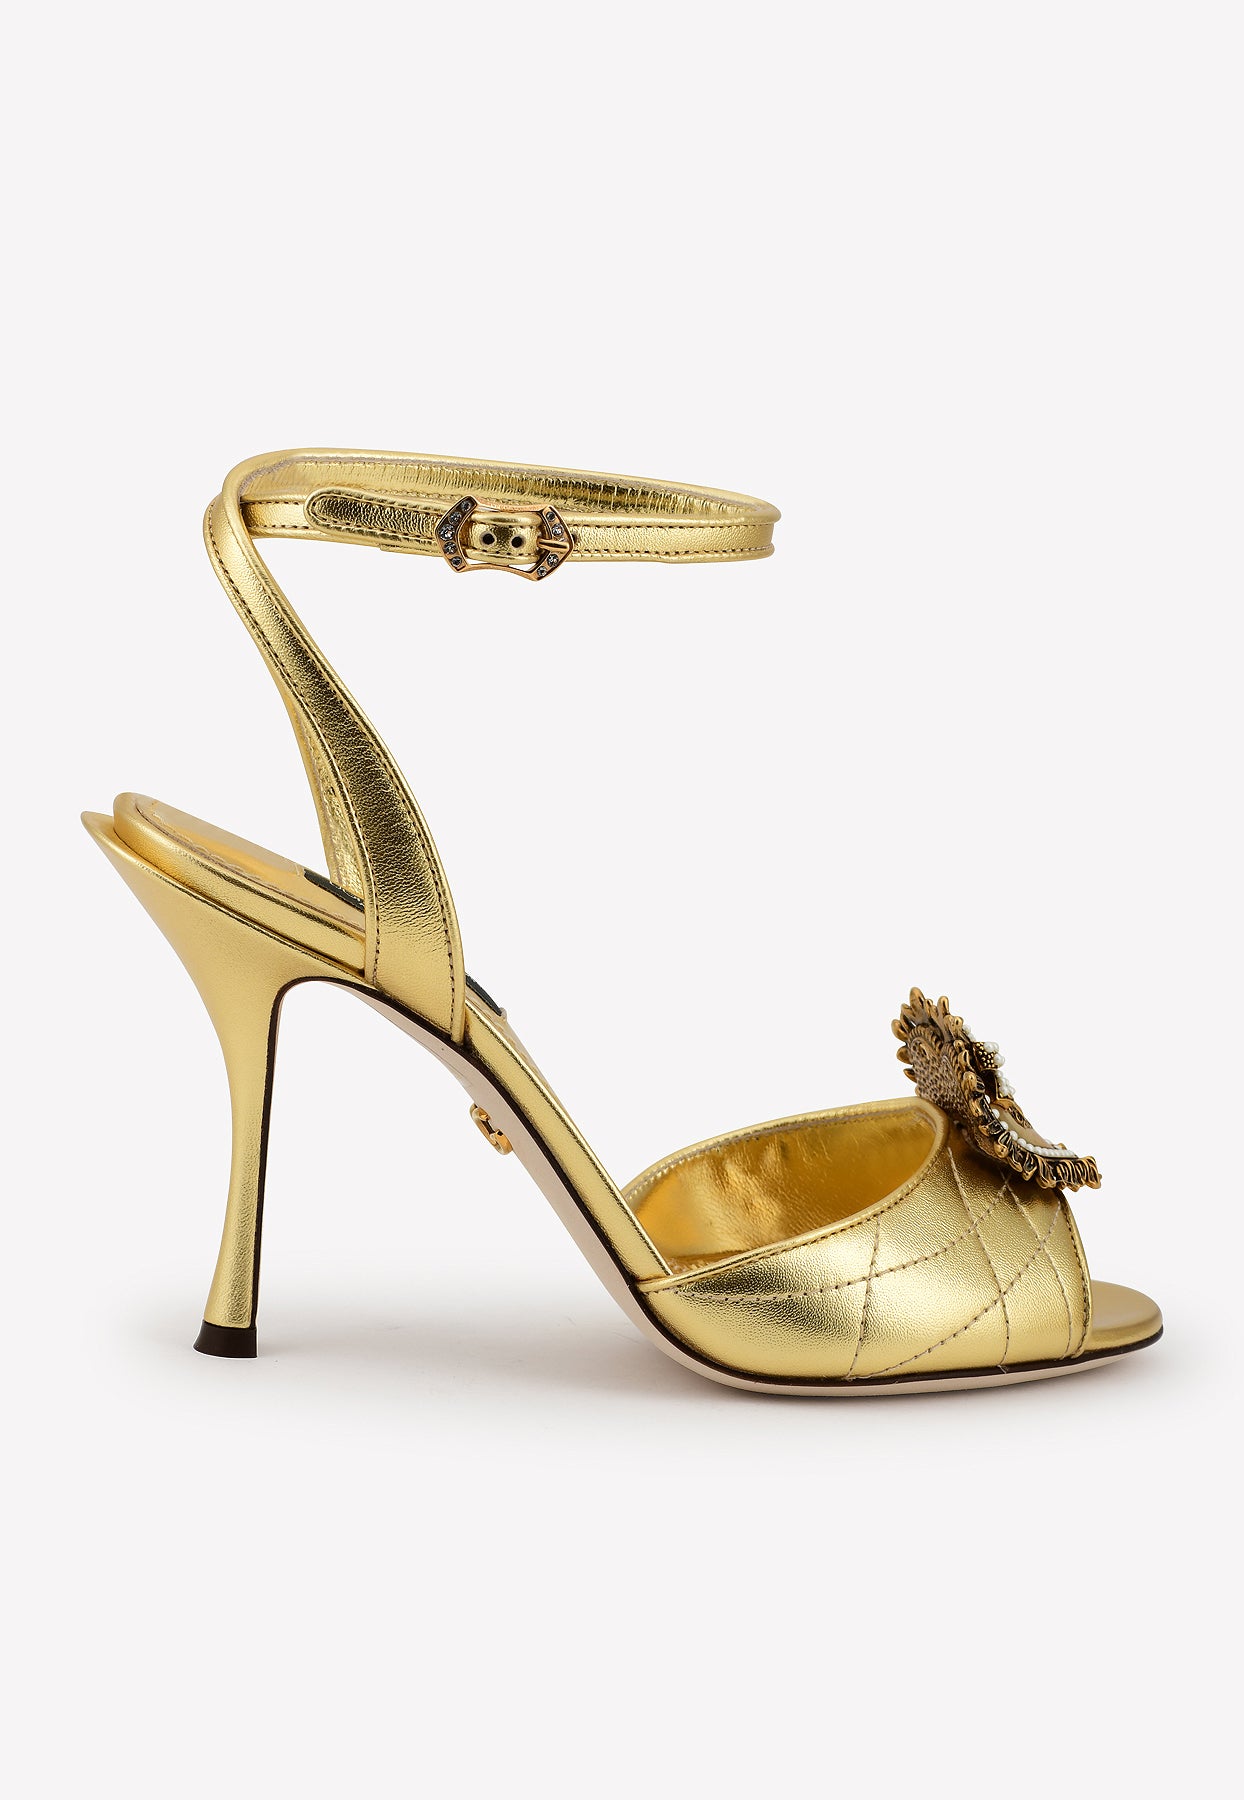 Keira 90 Devotion Sandals in Quilted Metallic Leather – THAHAB KW